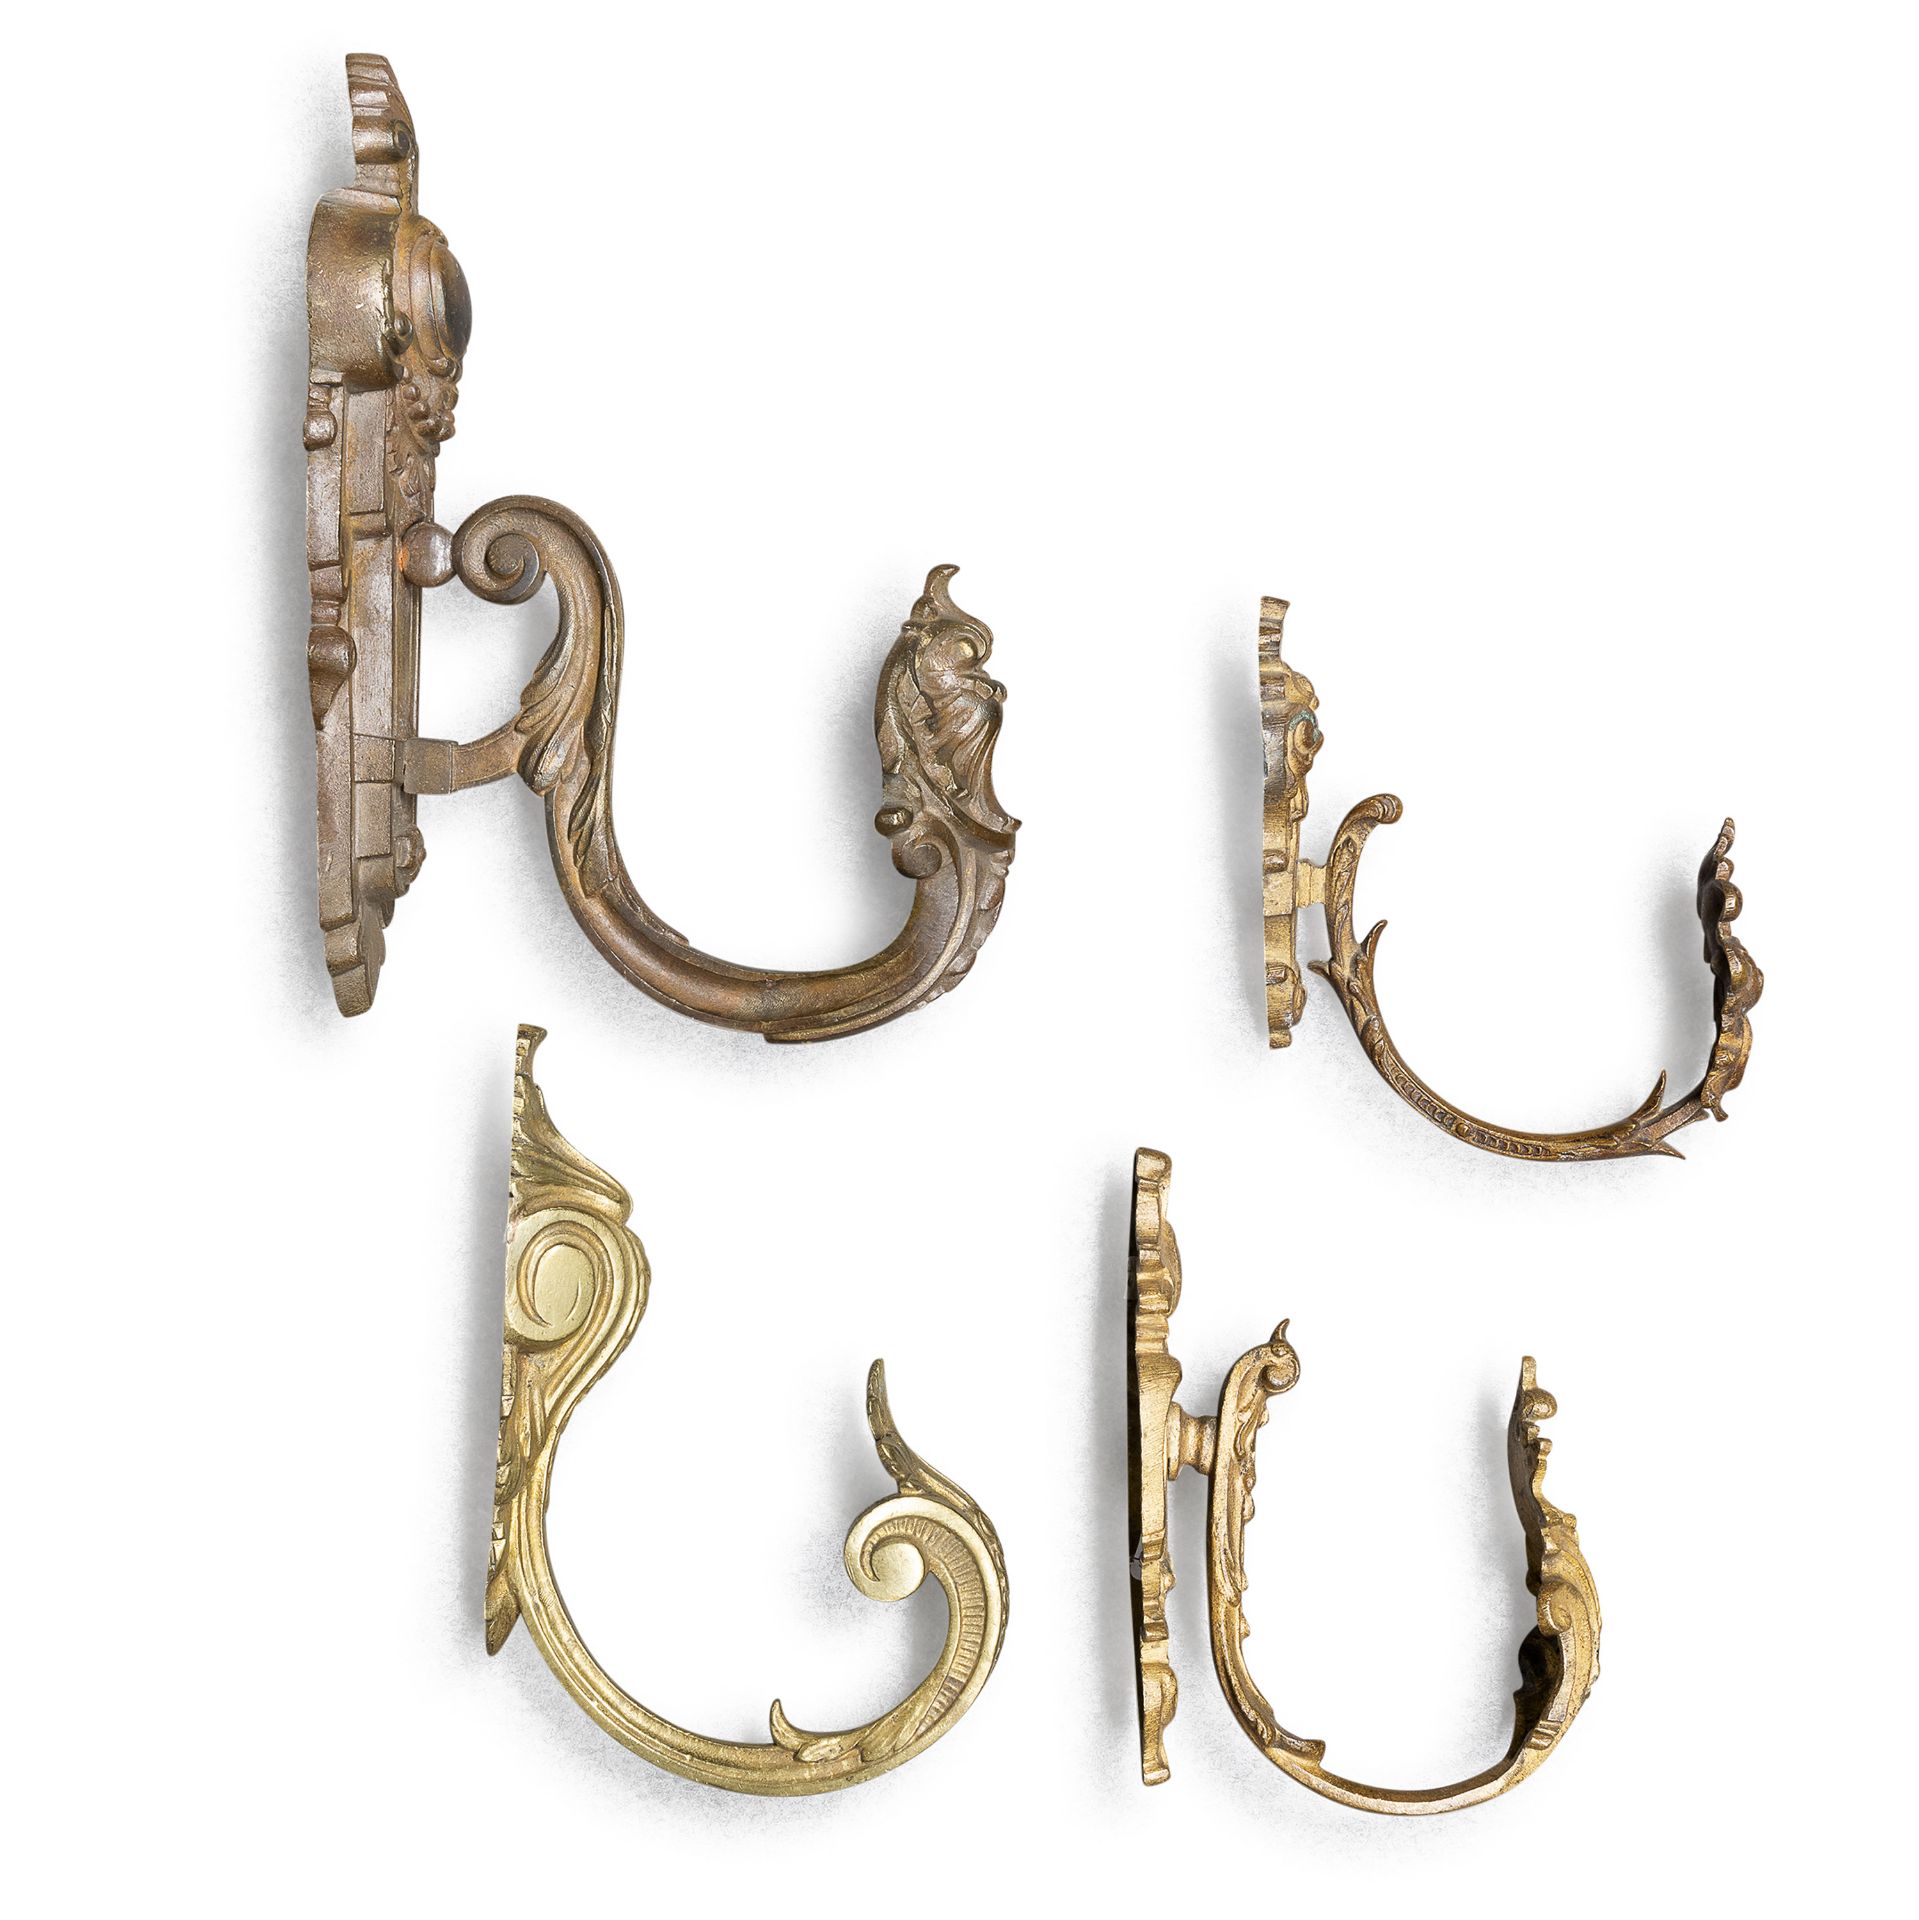 FOUR BRONZE CURTAIN ROD HOLDERS LATE 18th CENTURY